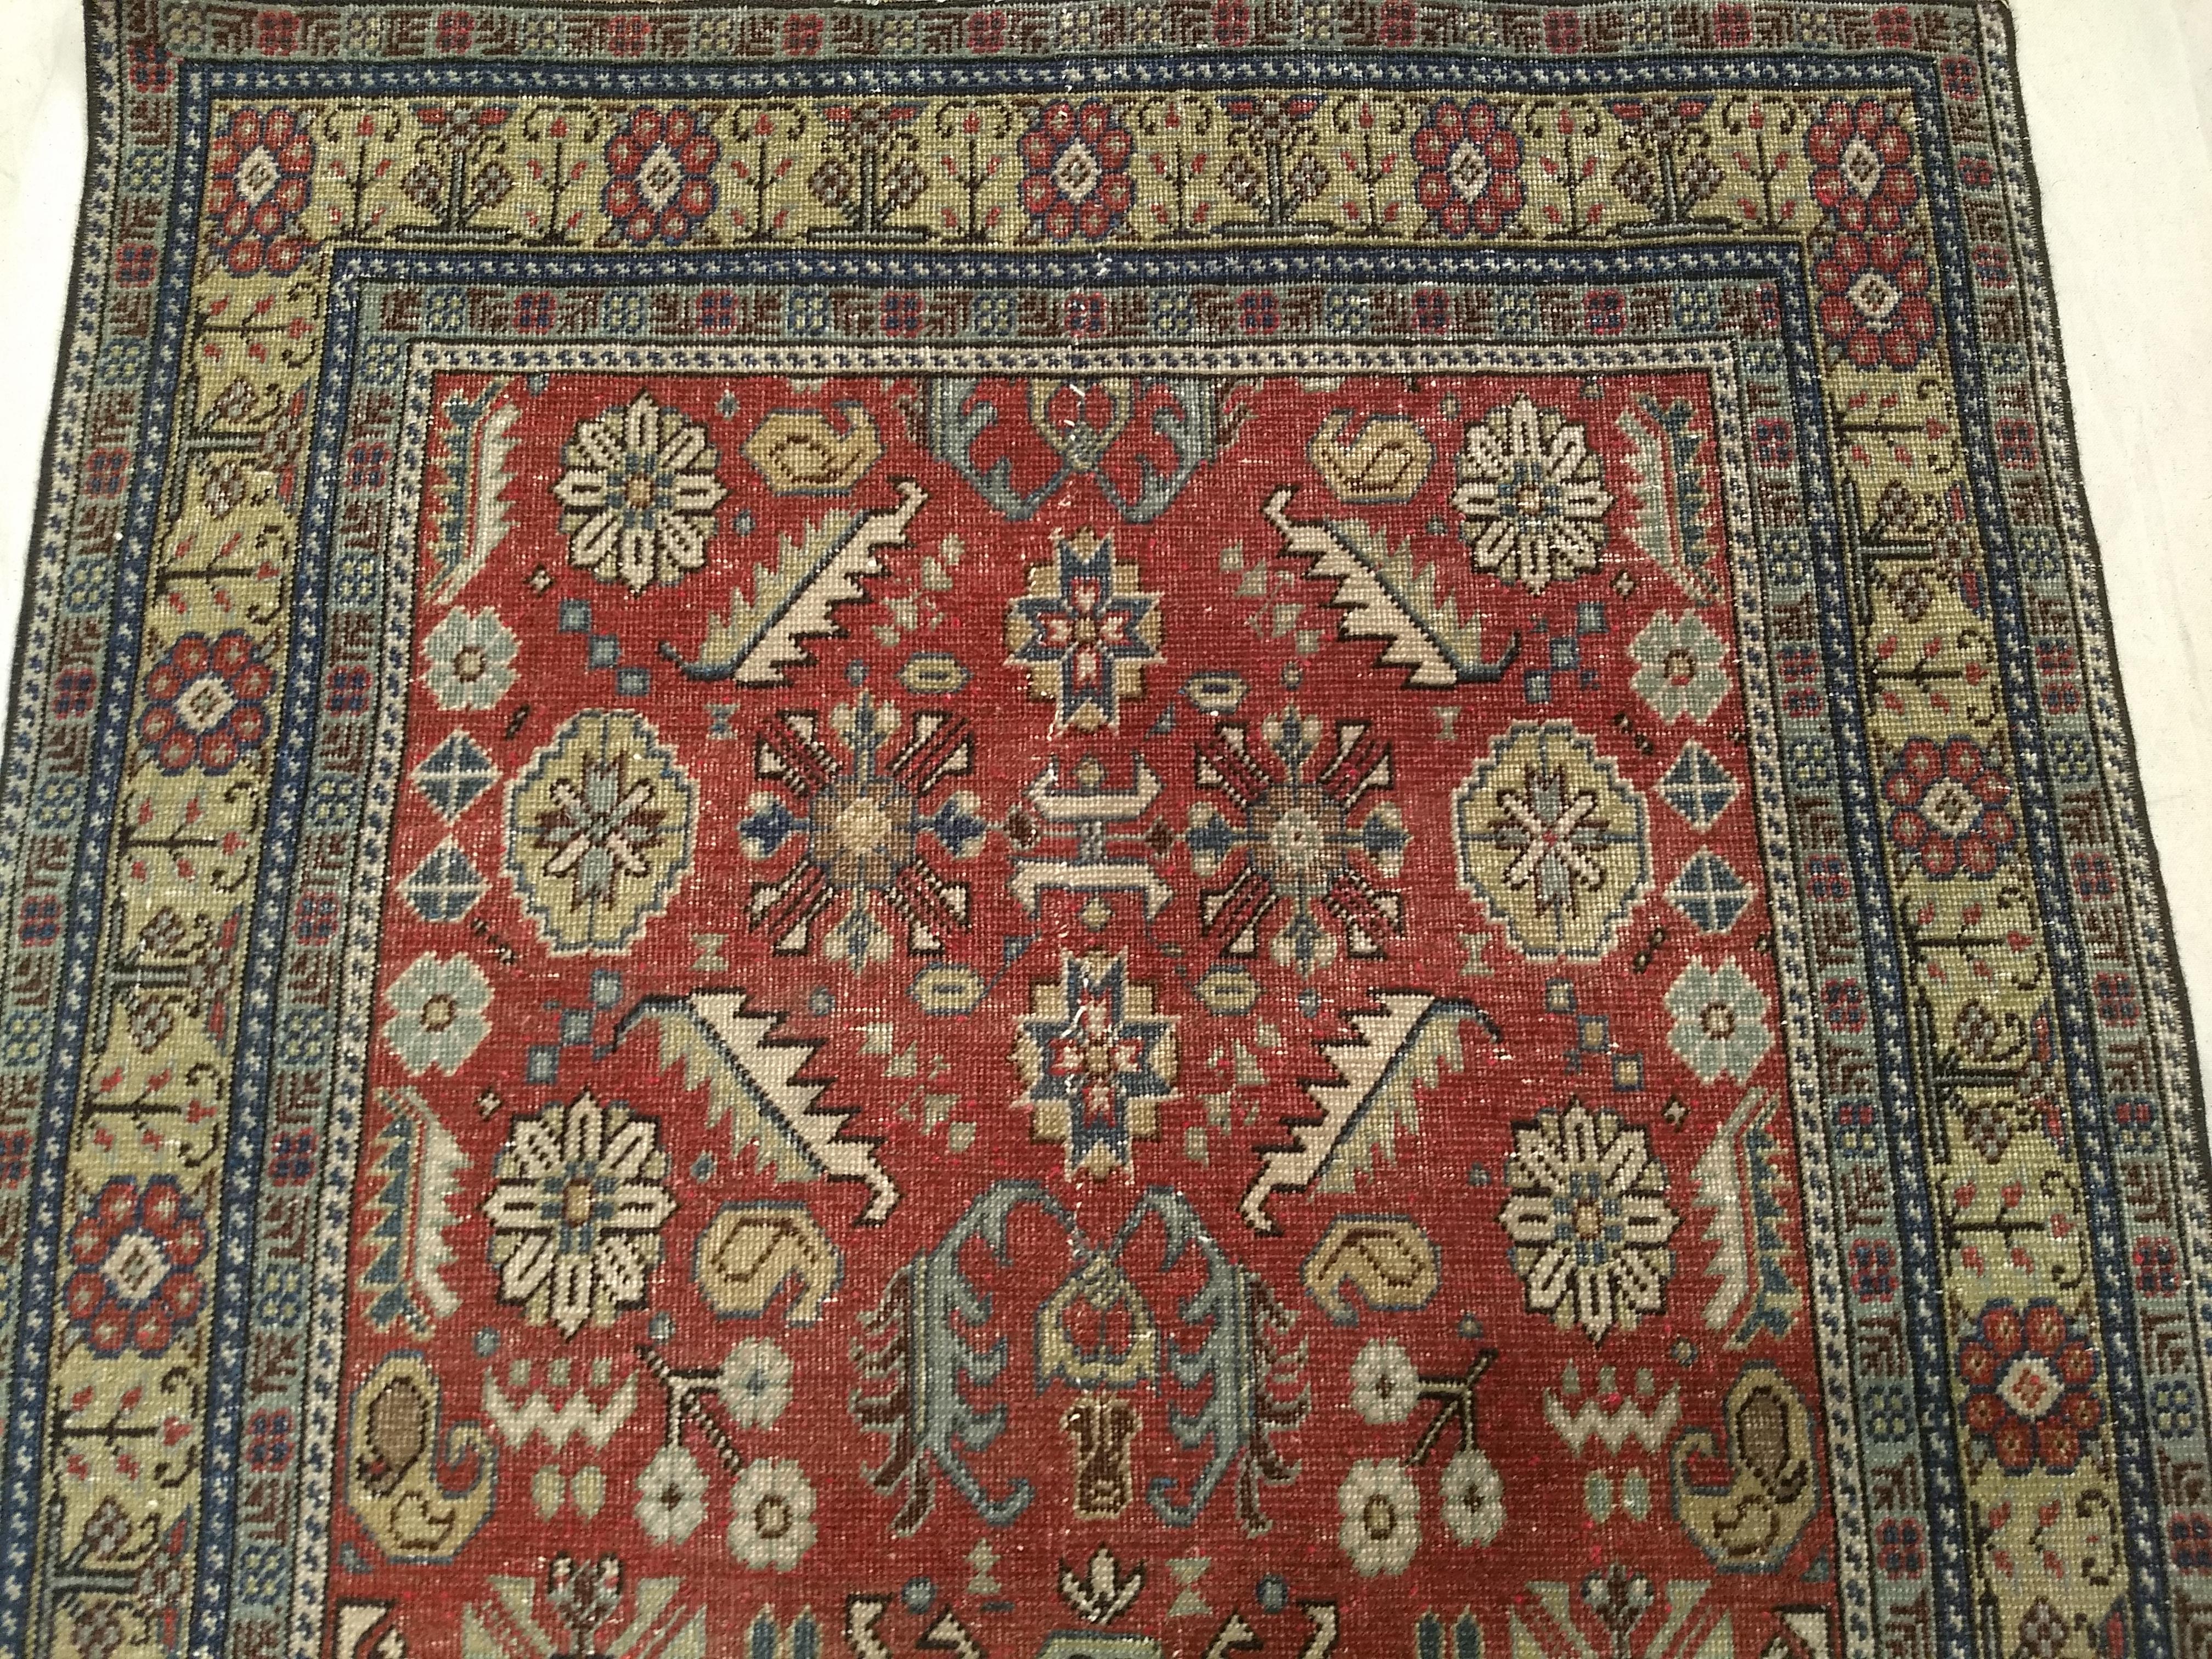 Vintage Khotan Area Rug in Allover Geometric Pattern on Brick Red, Yellow, Ivory For Sale 3